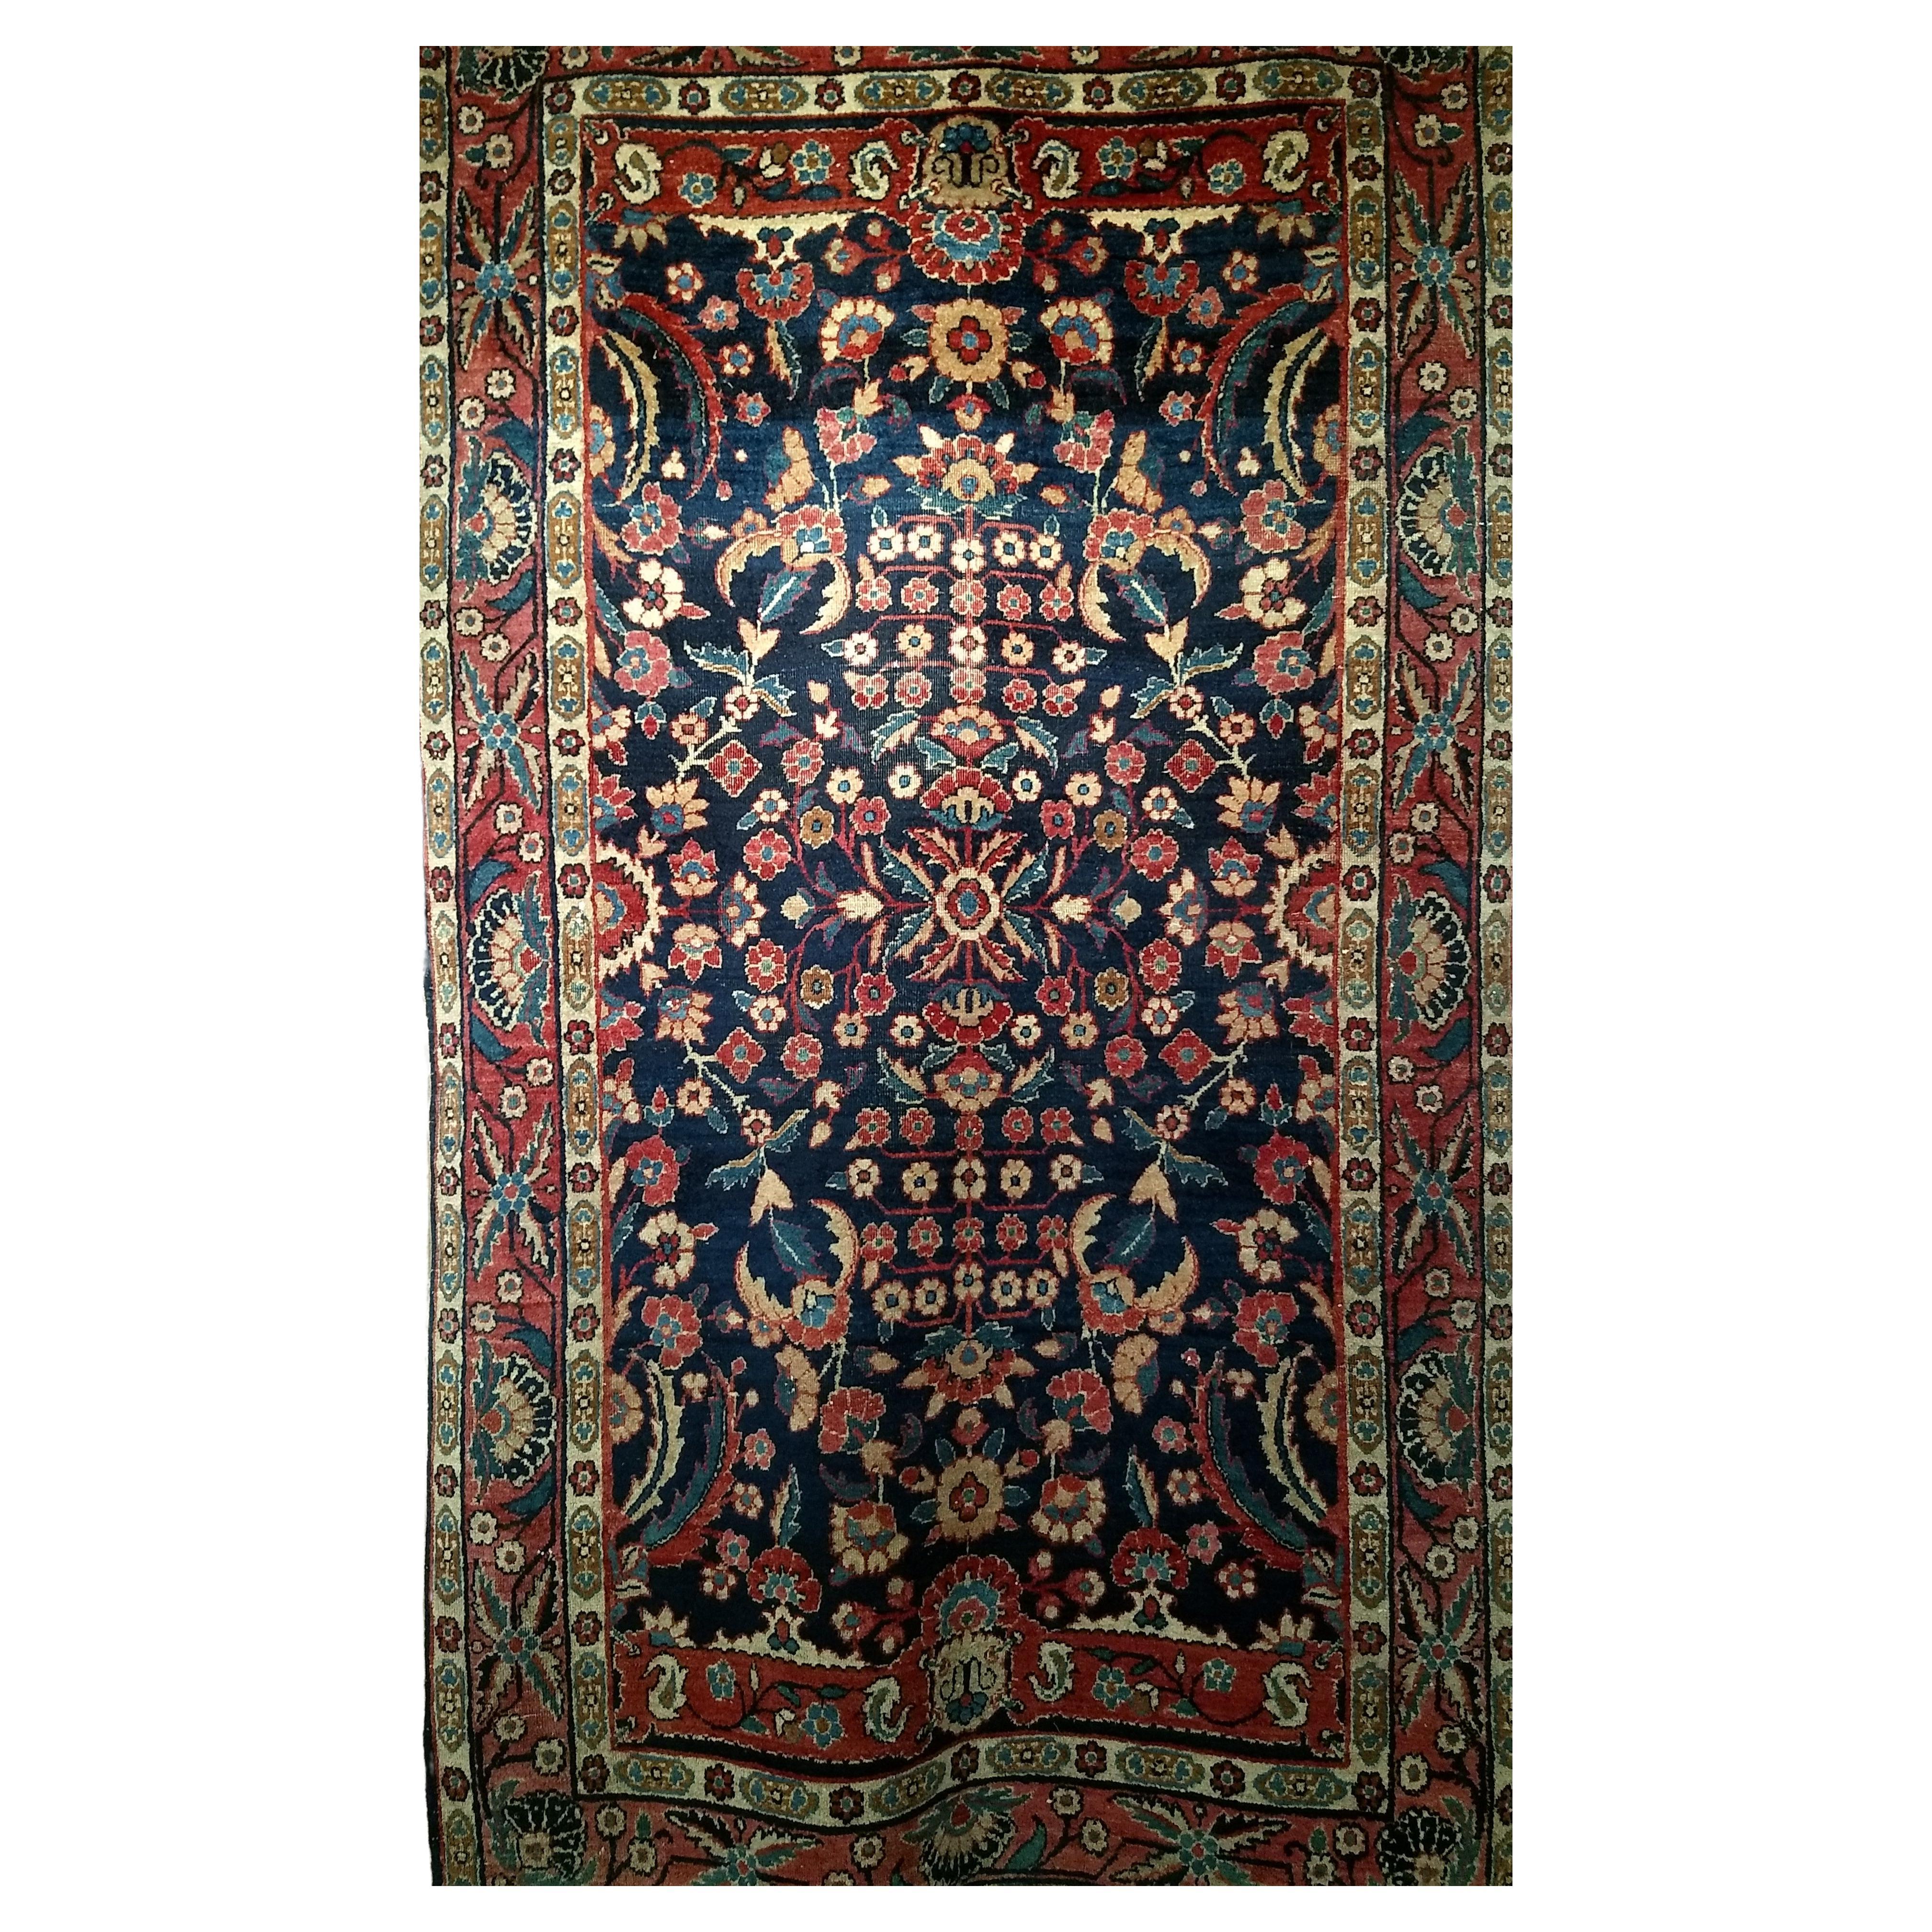 Vintage Agra Rug in Allover Floral Pattern in Navy Blue and Red Colors For Sale